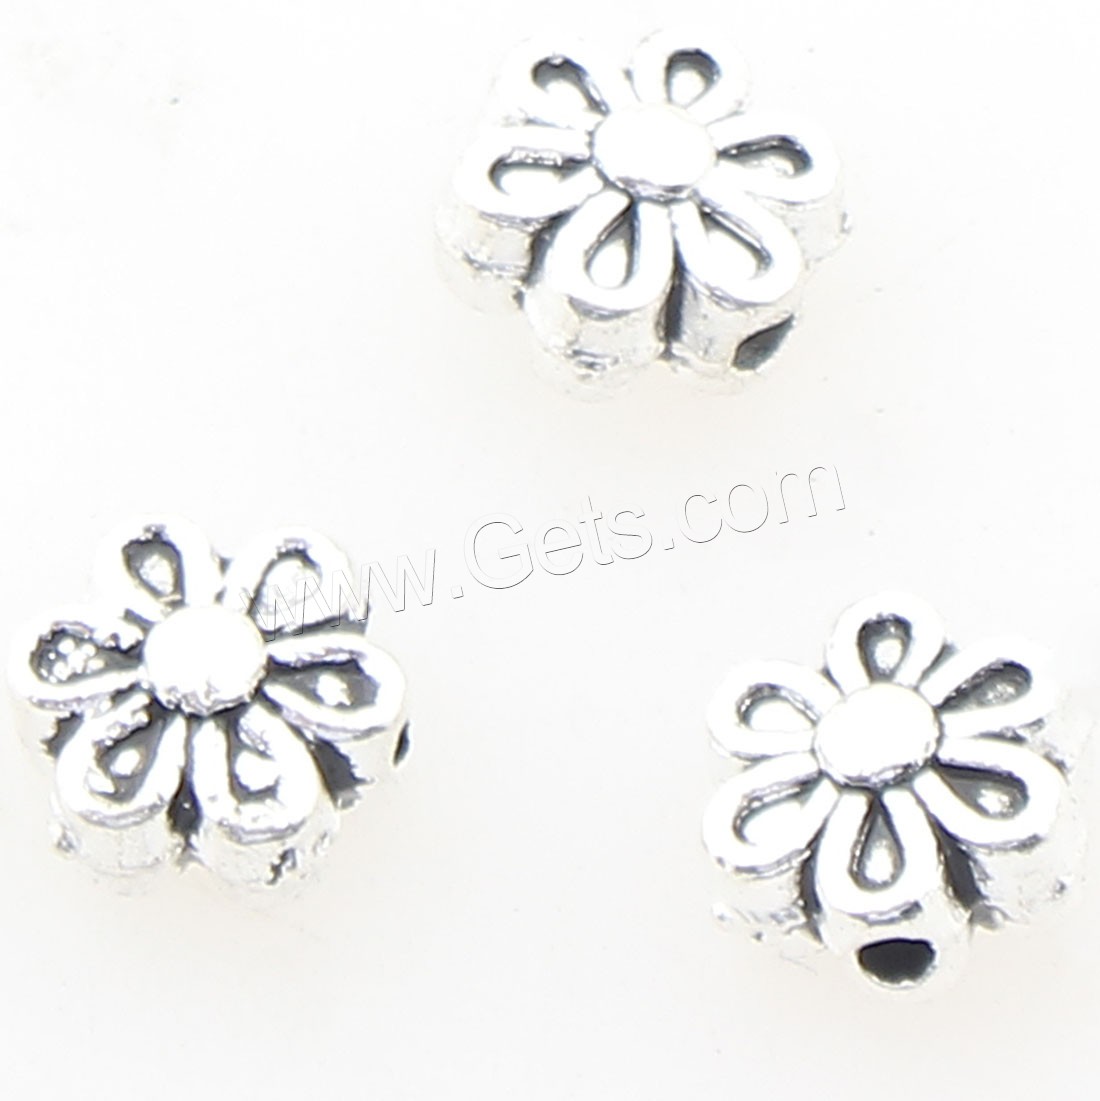 Zinc Alloy Flower Beads, antique silver color plated, 6x6mm, Hole:Approx 1mm, Approx 1190PCs/Bag, Sold By Bag